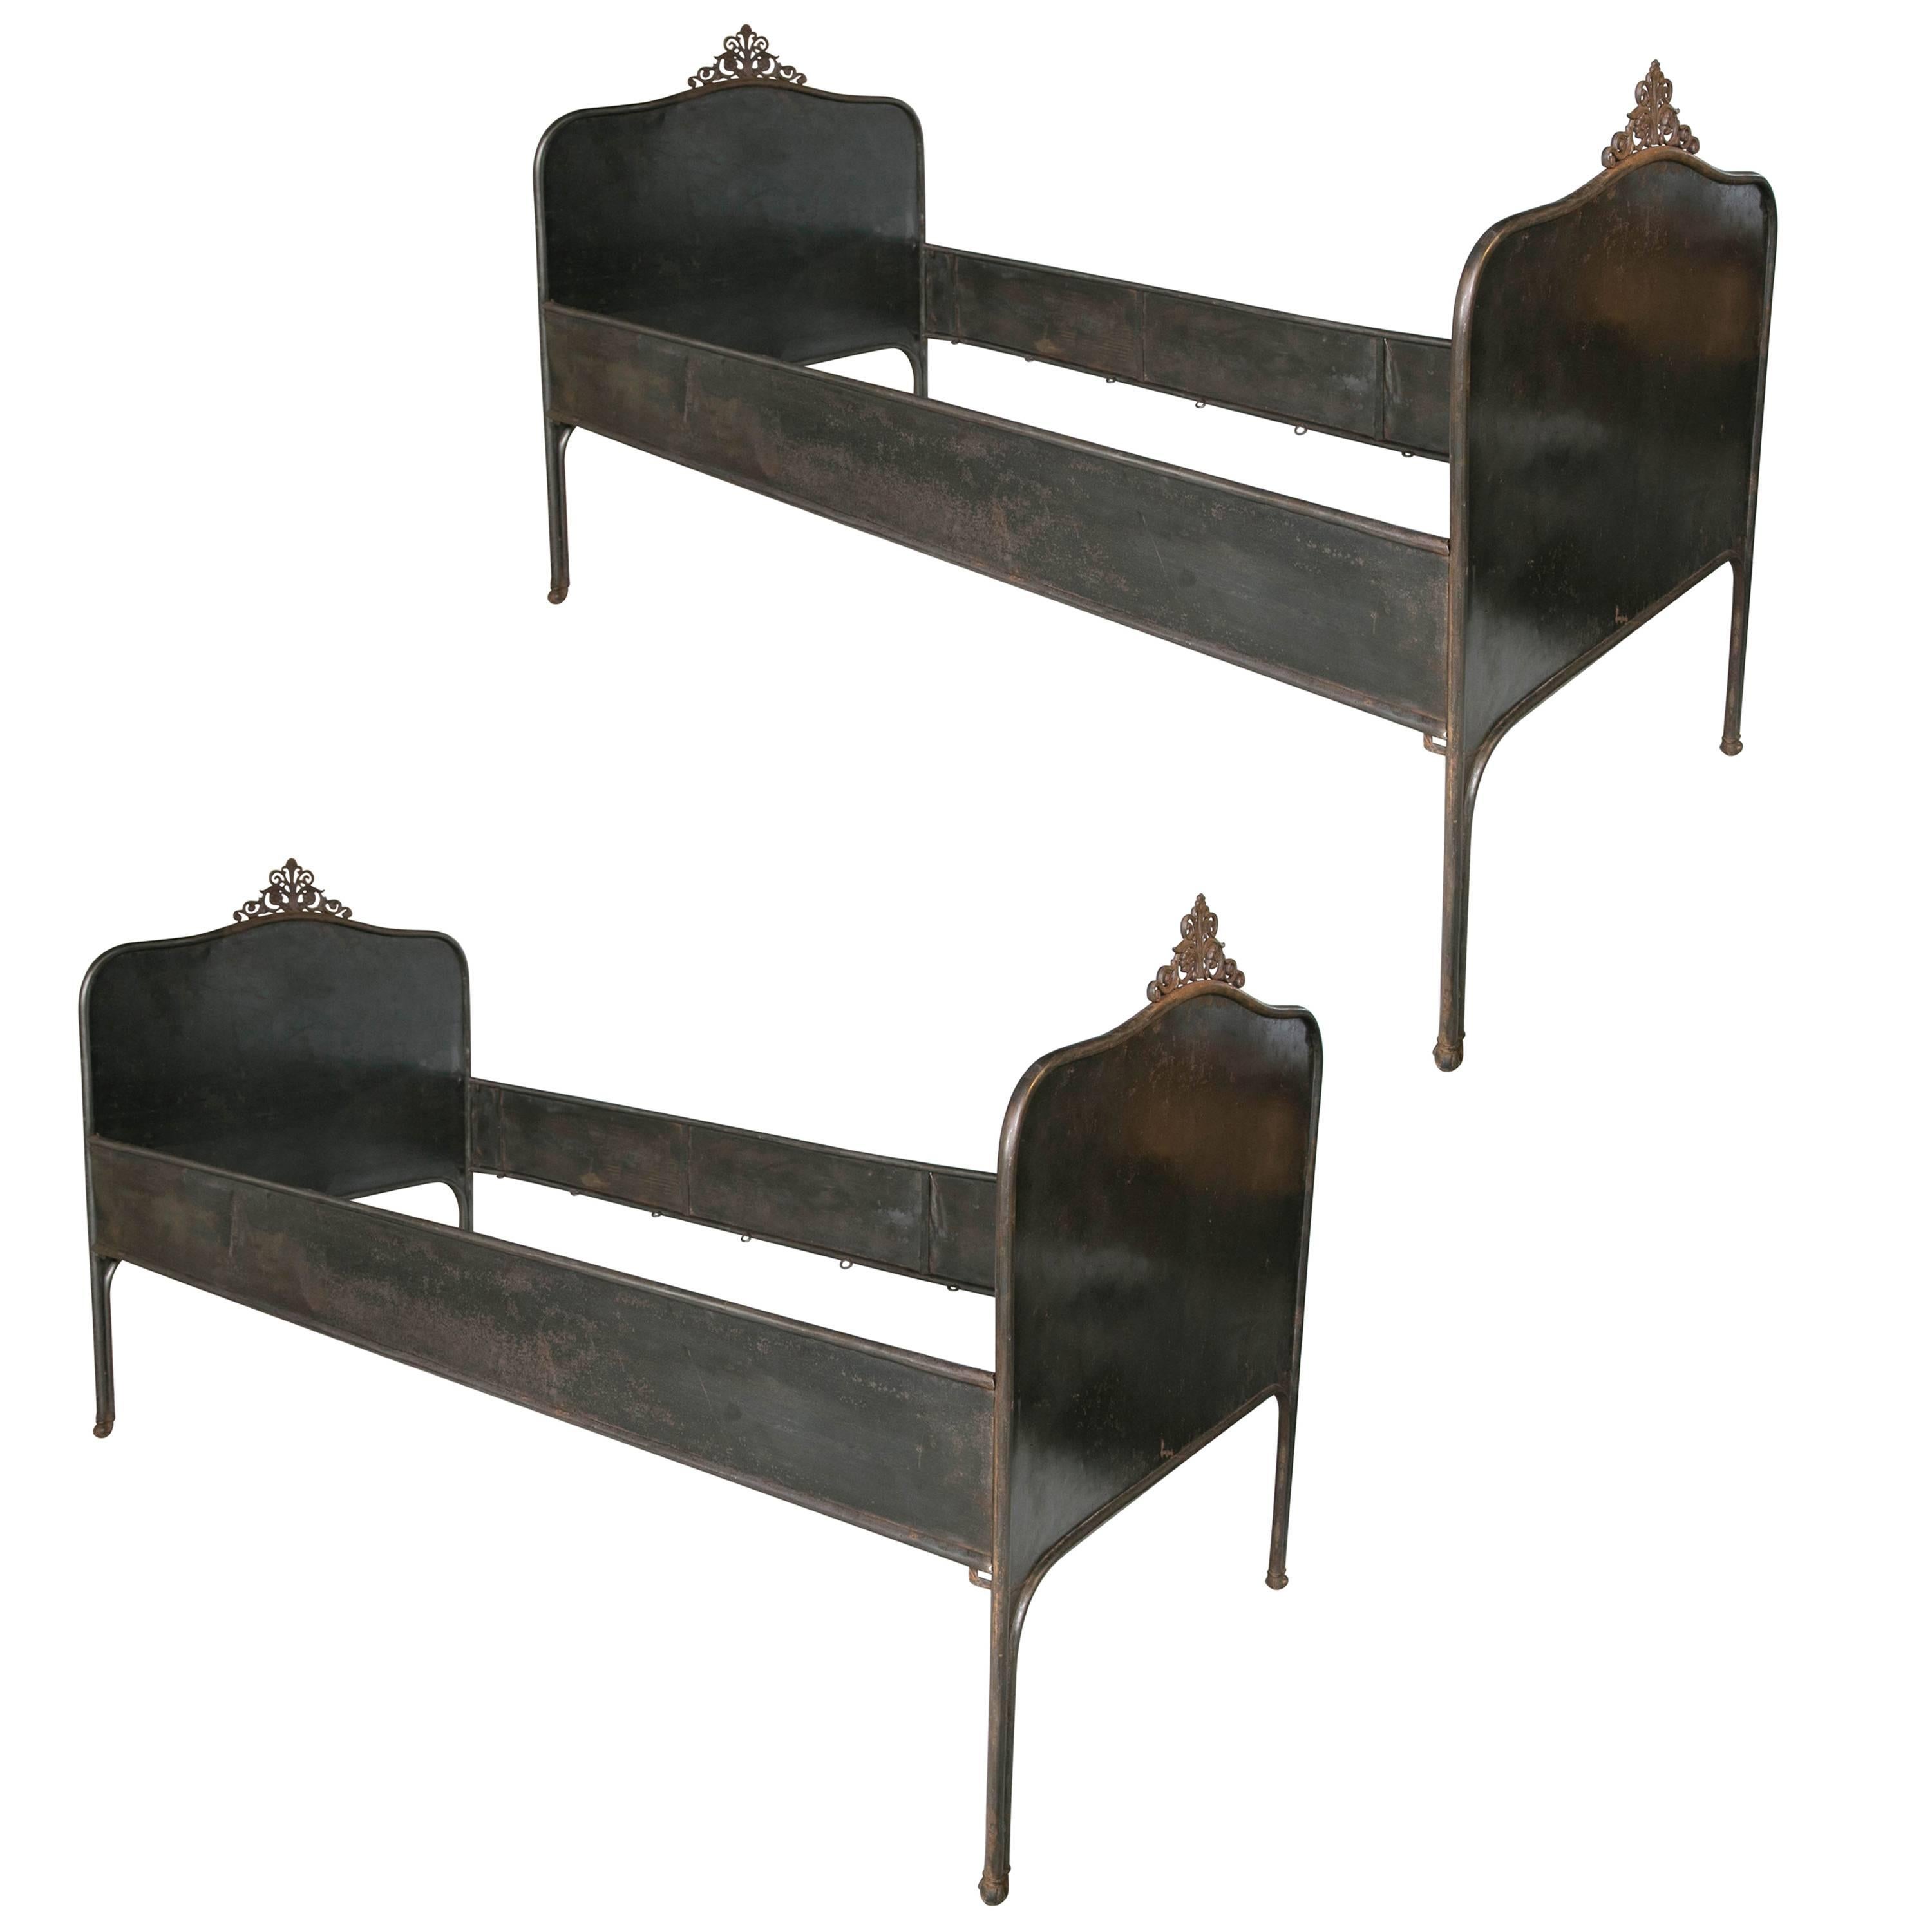 Pair of French Iron Bedsteads